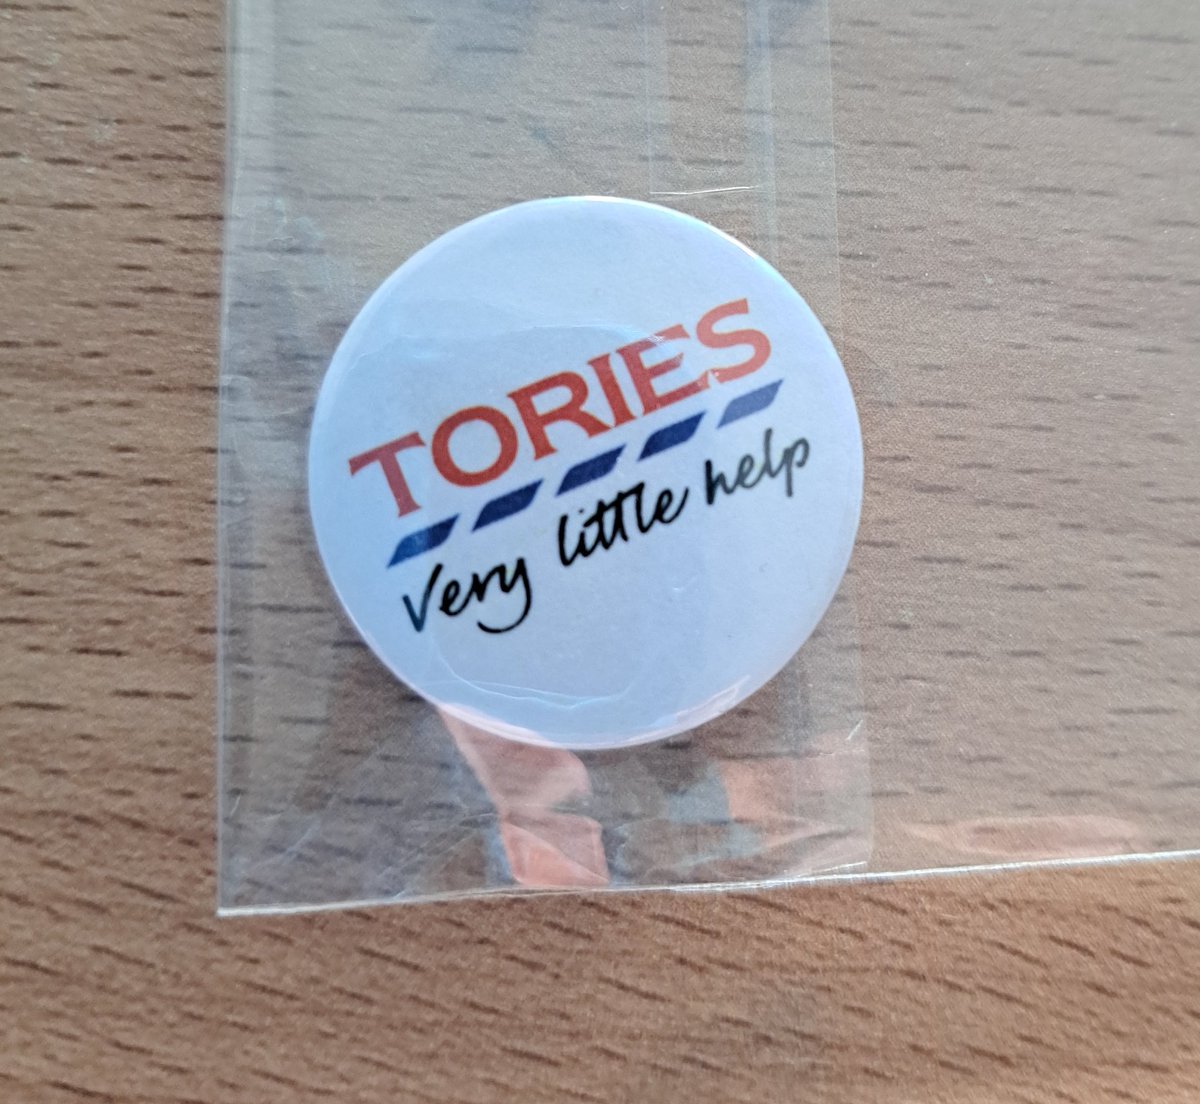 When your work colleagues all get badges, and you get this one 👌 #fuckthetories #verylittlehelp #GTTO #TORIESOUT #borisisaliar